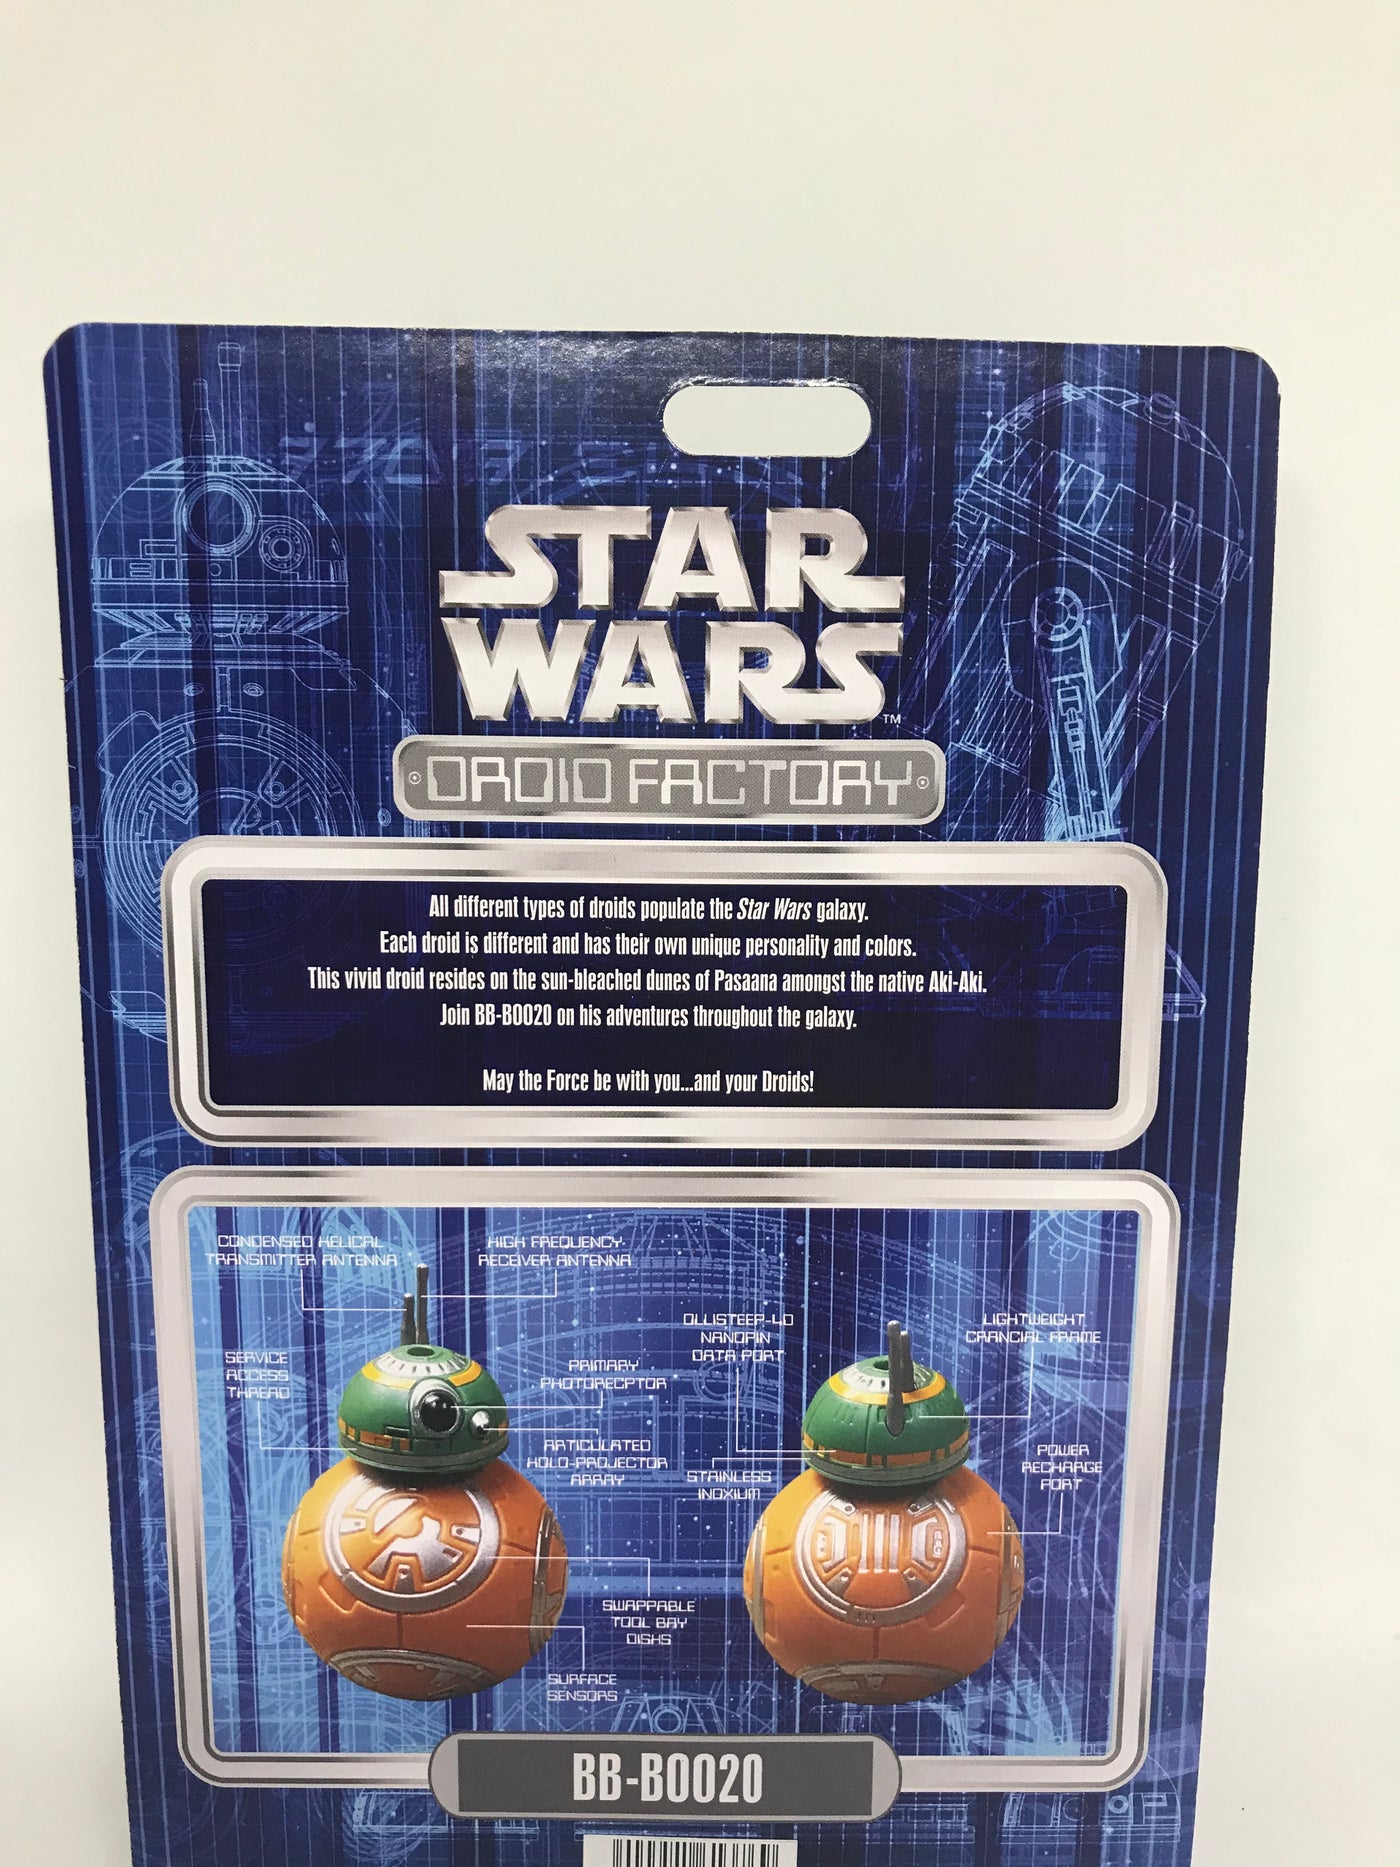 Disney Parks Star Wars BB-B0020 Halloween Holiday Droid Factory New with Box